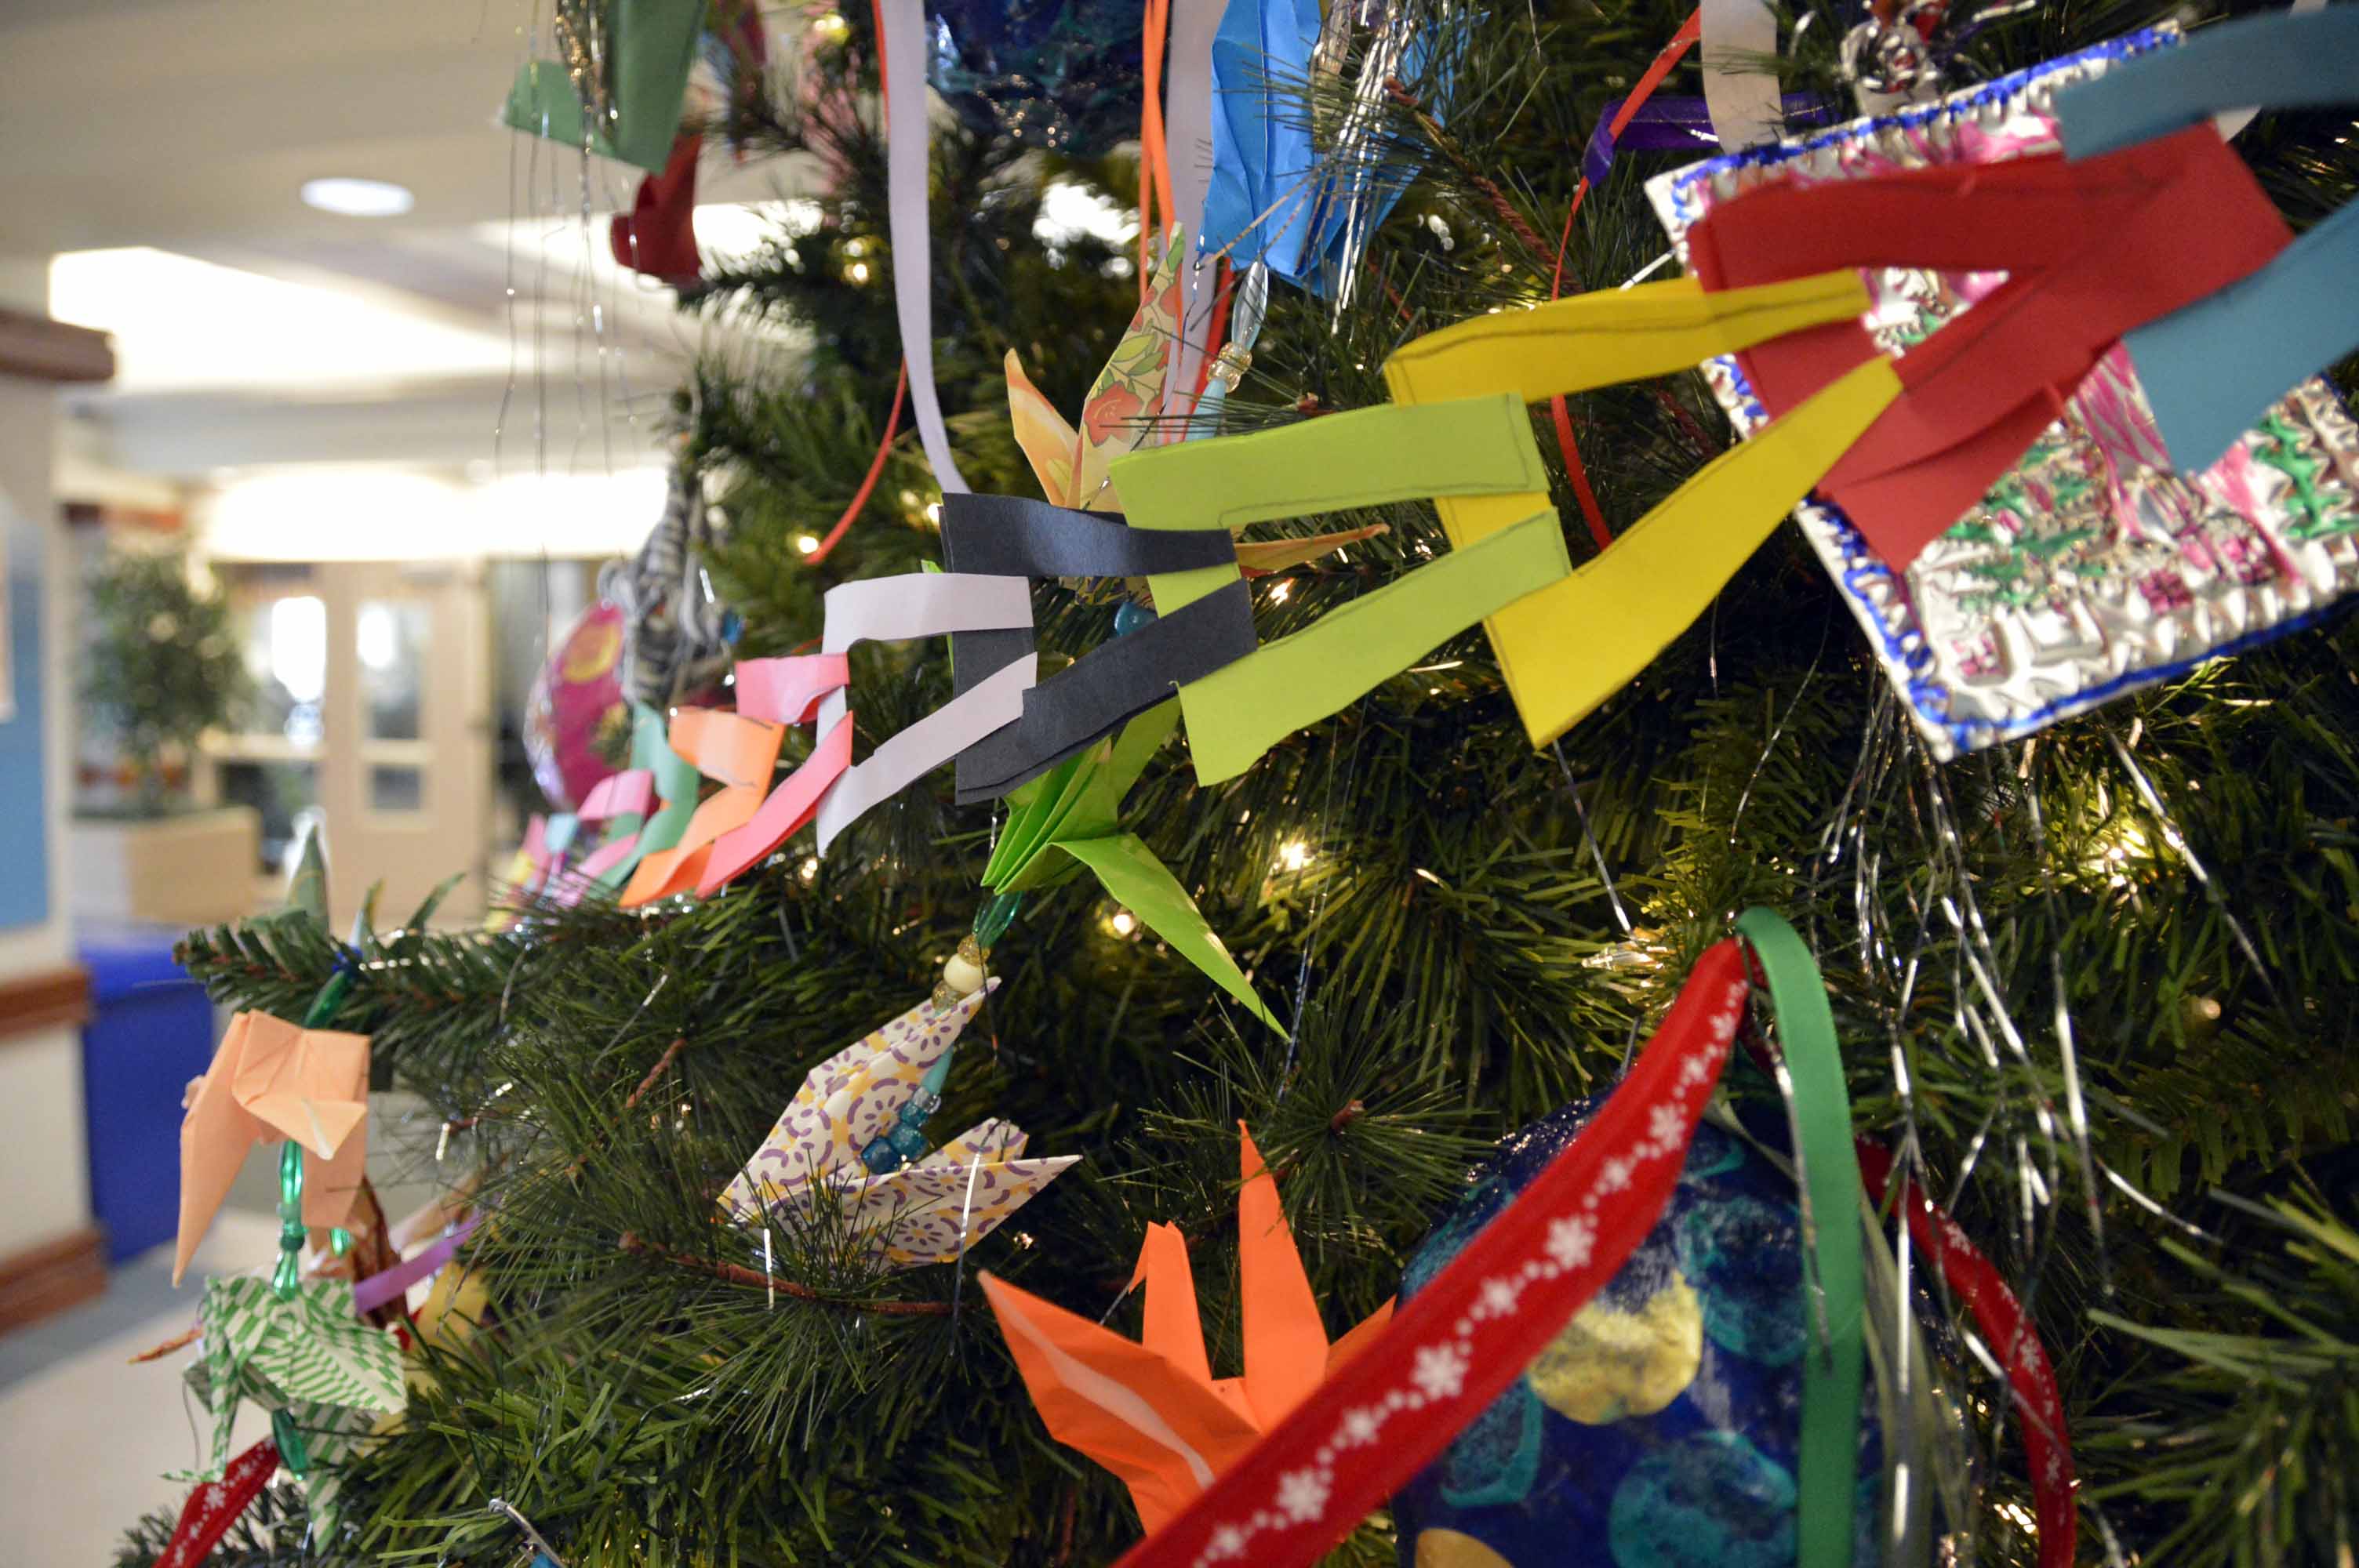 Photos: Handcrafted ornaments adorn Wilson Elementary ‘diversitree’